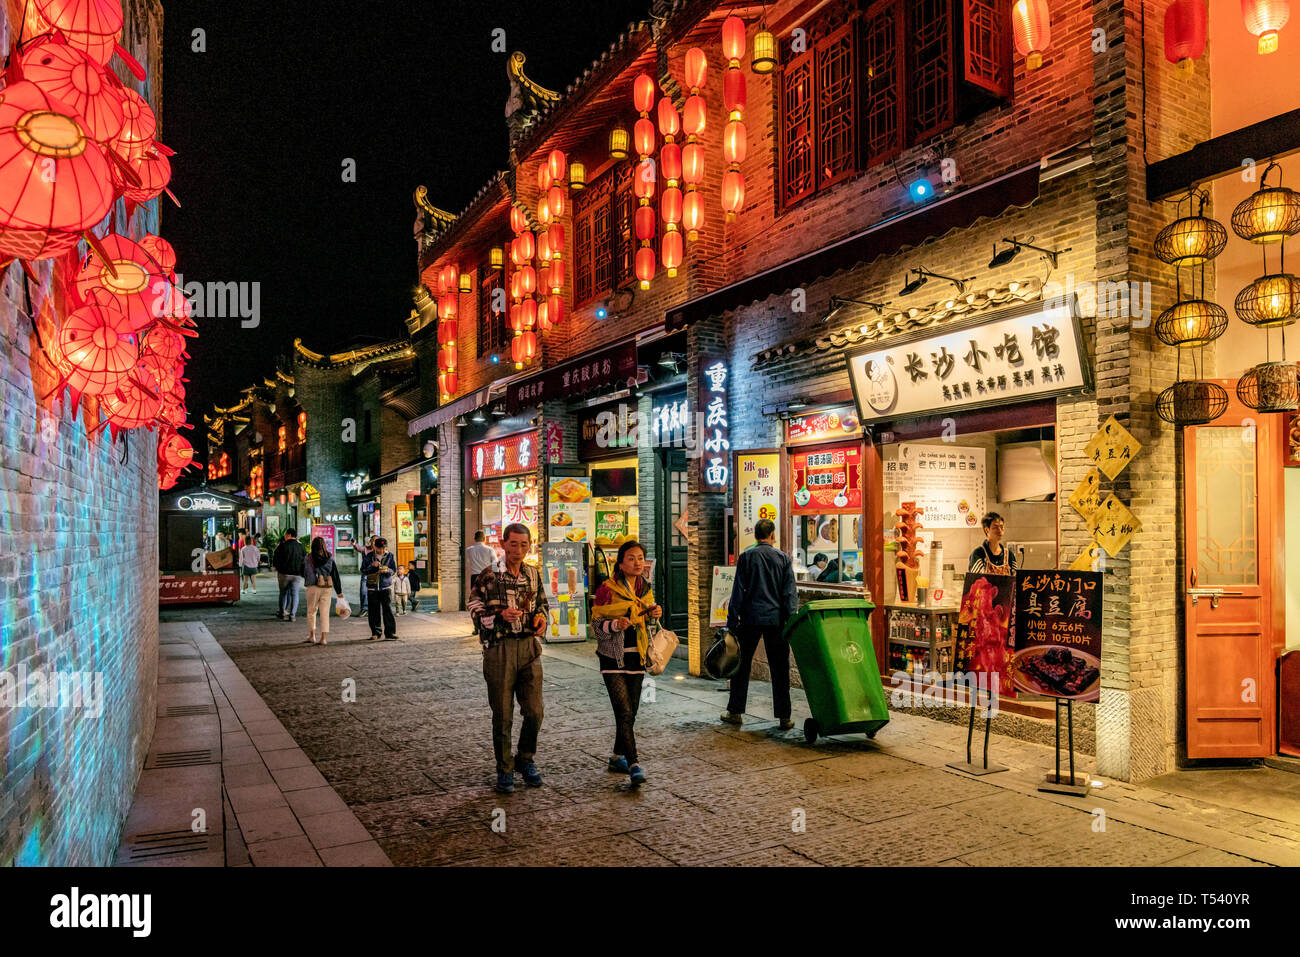 GUILIN, CHINA - NOVEMBER 01: This is a shopping street with traditional Chinese buildings near Zhengyang Pedestrian Stret on November 01, 2018 in Guil Stock Photo